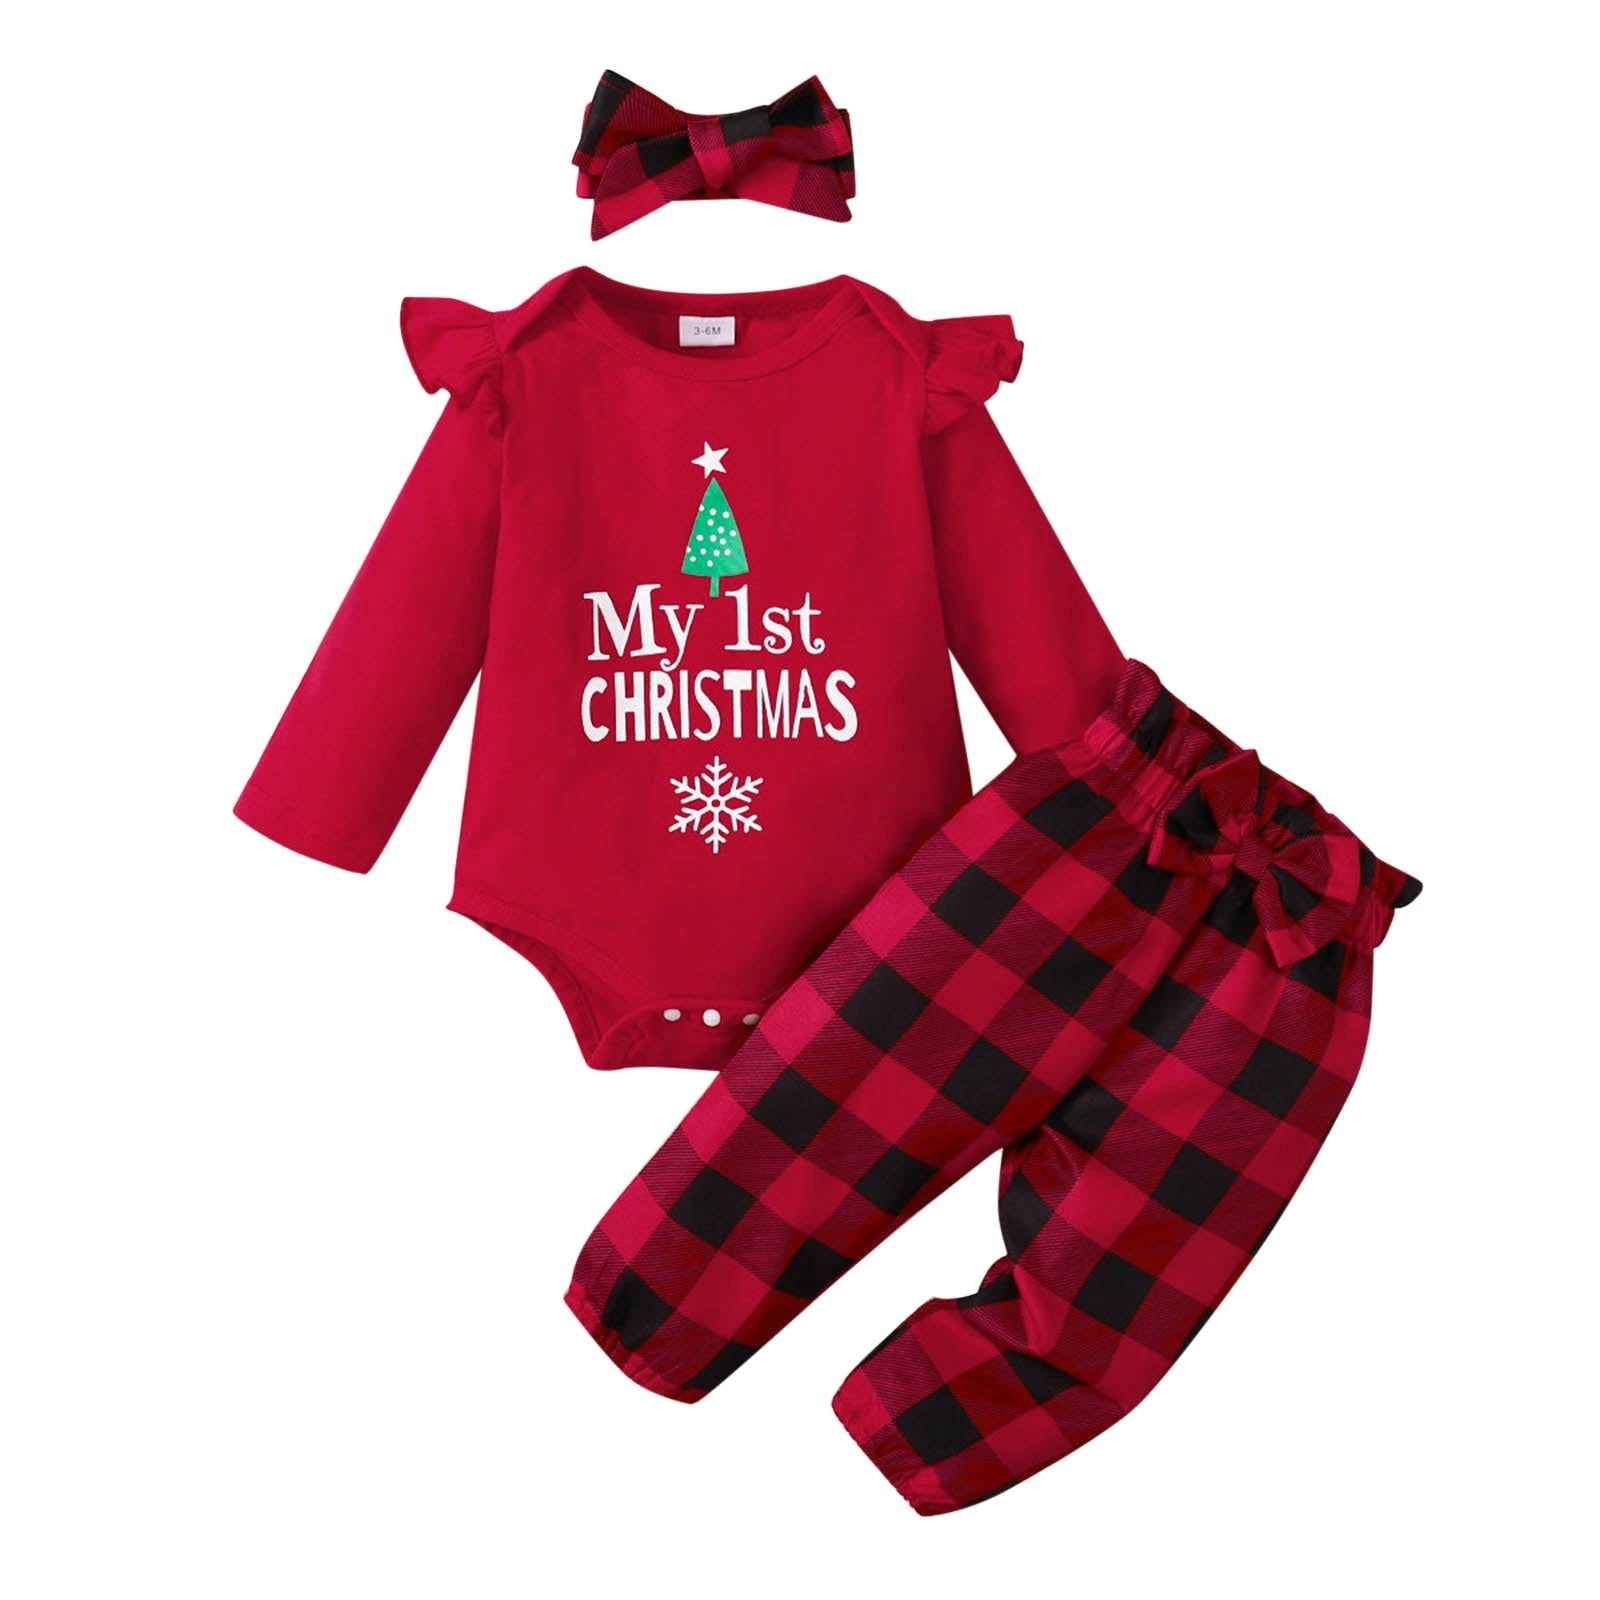 Adorable Christmas Outfits for Newborn Infant Girls - Long Sleeve Rompers, Pants, and Headbands Sets